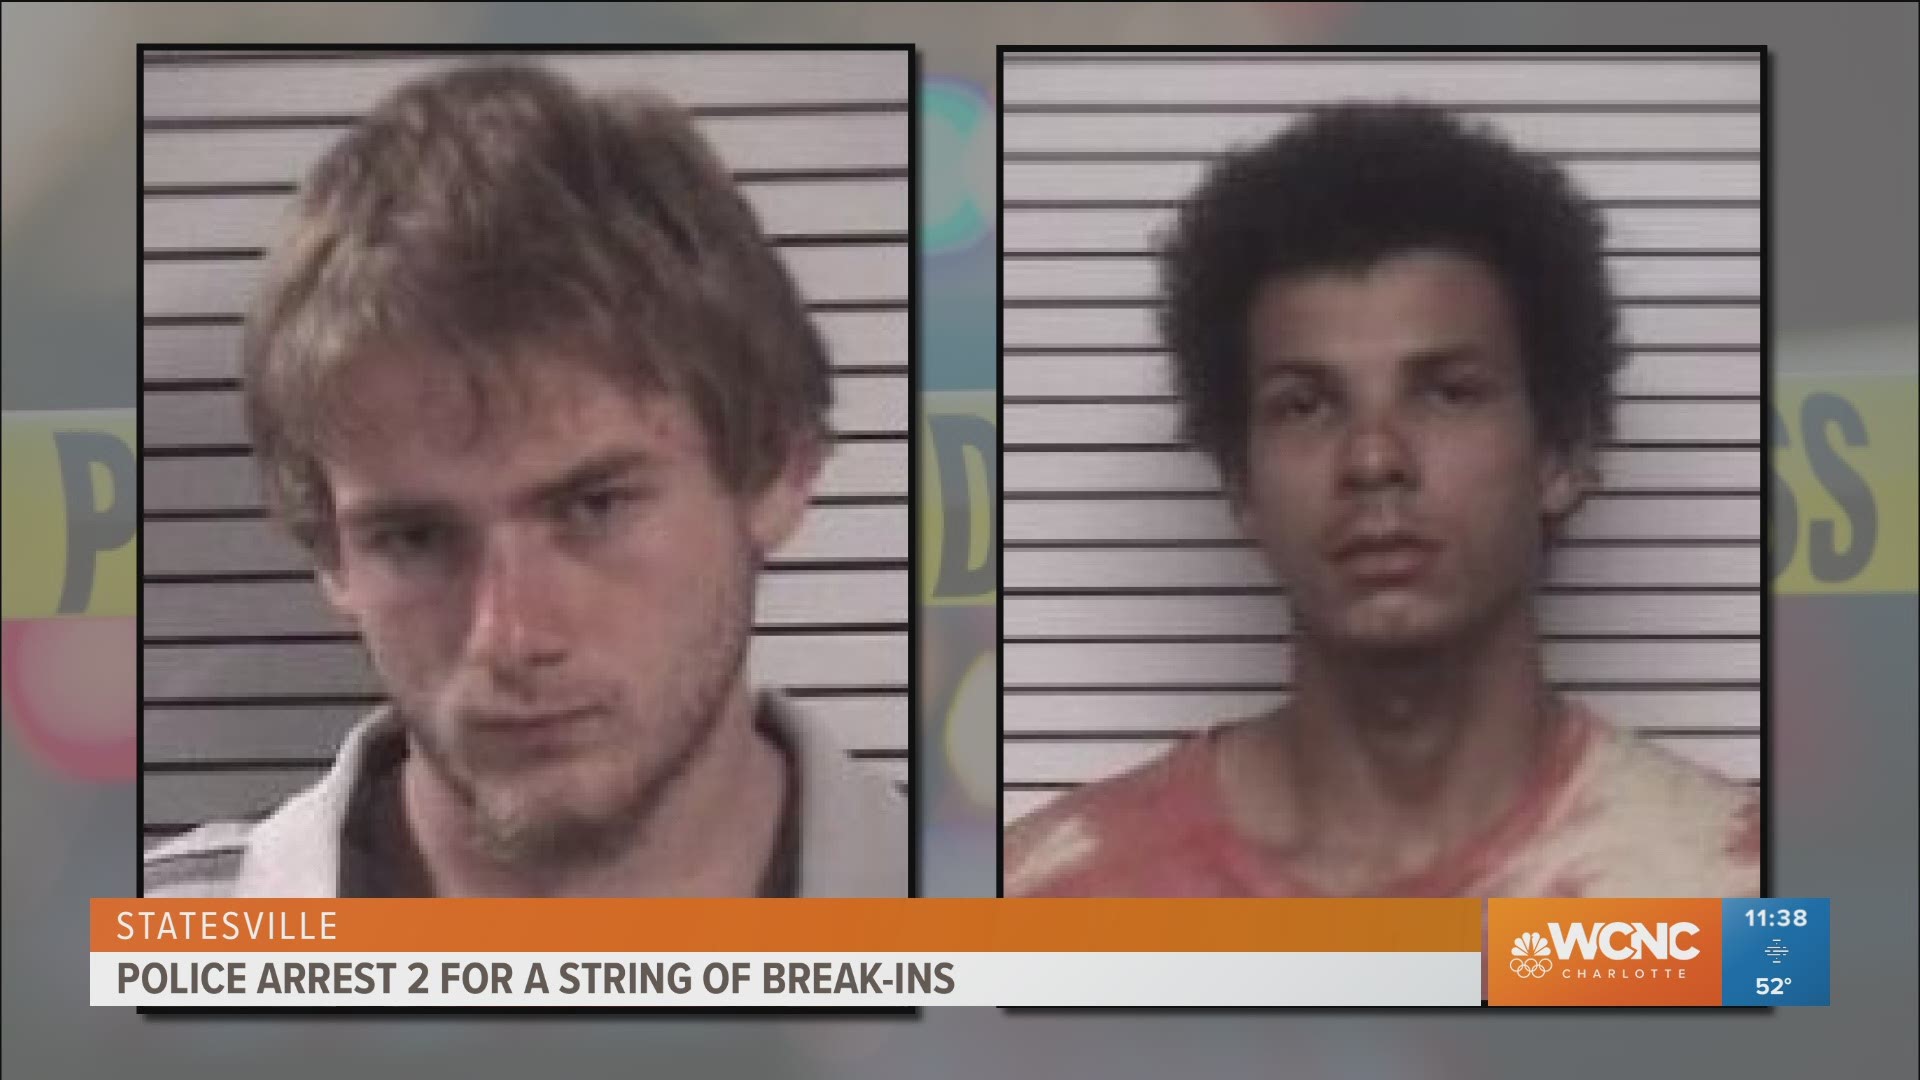 Two men are facing multiple charges after a string of car and home break-ins across Statesville, North Carolina.